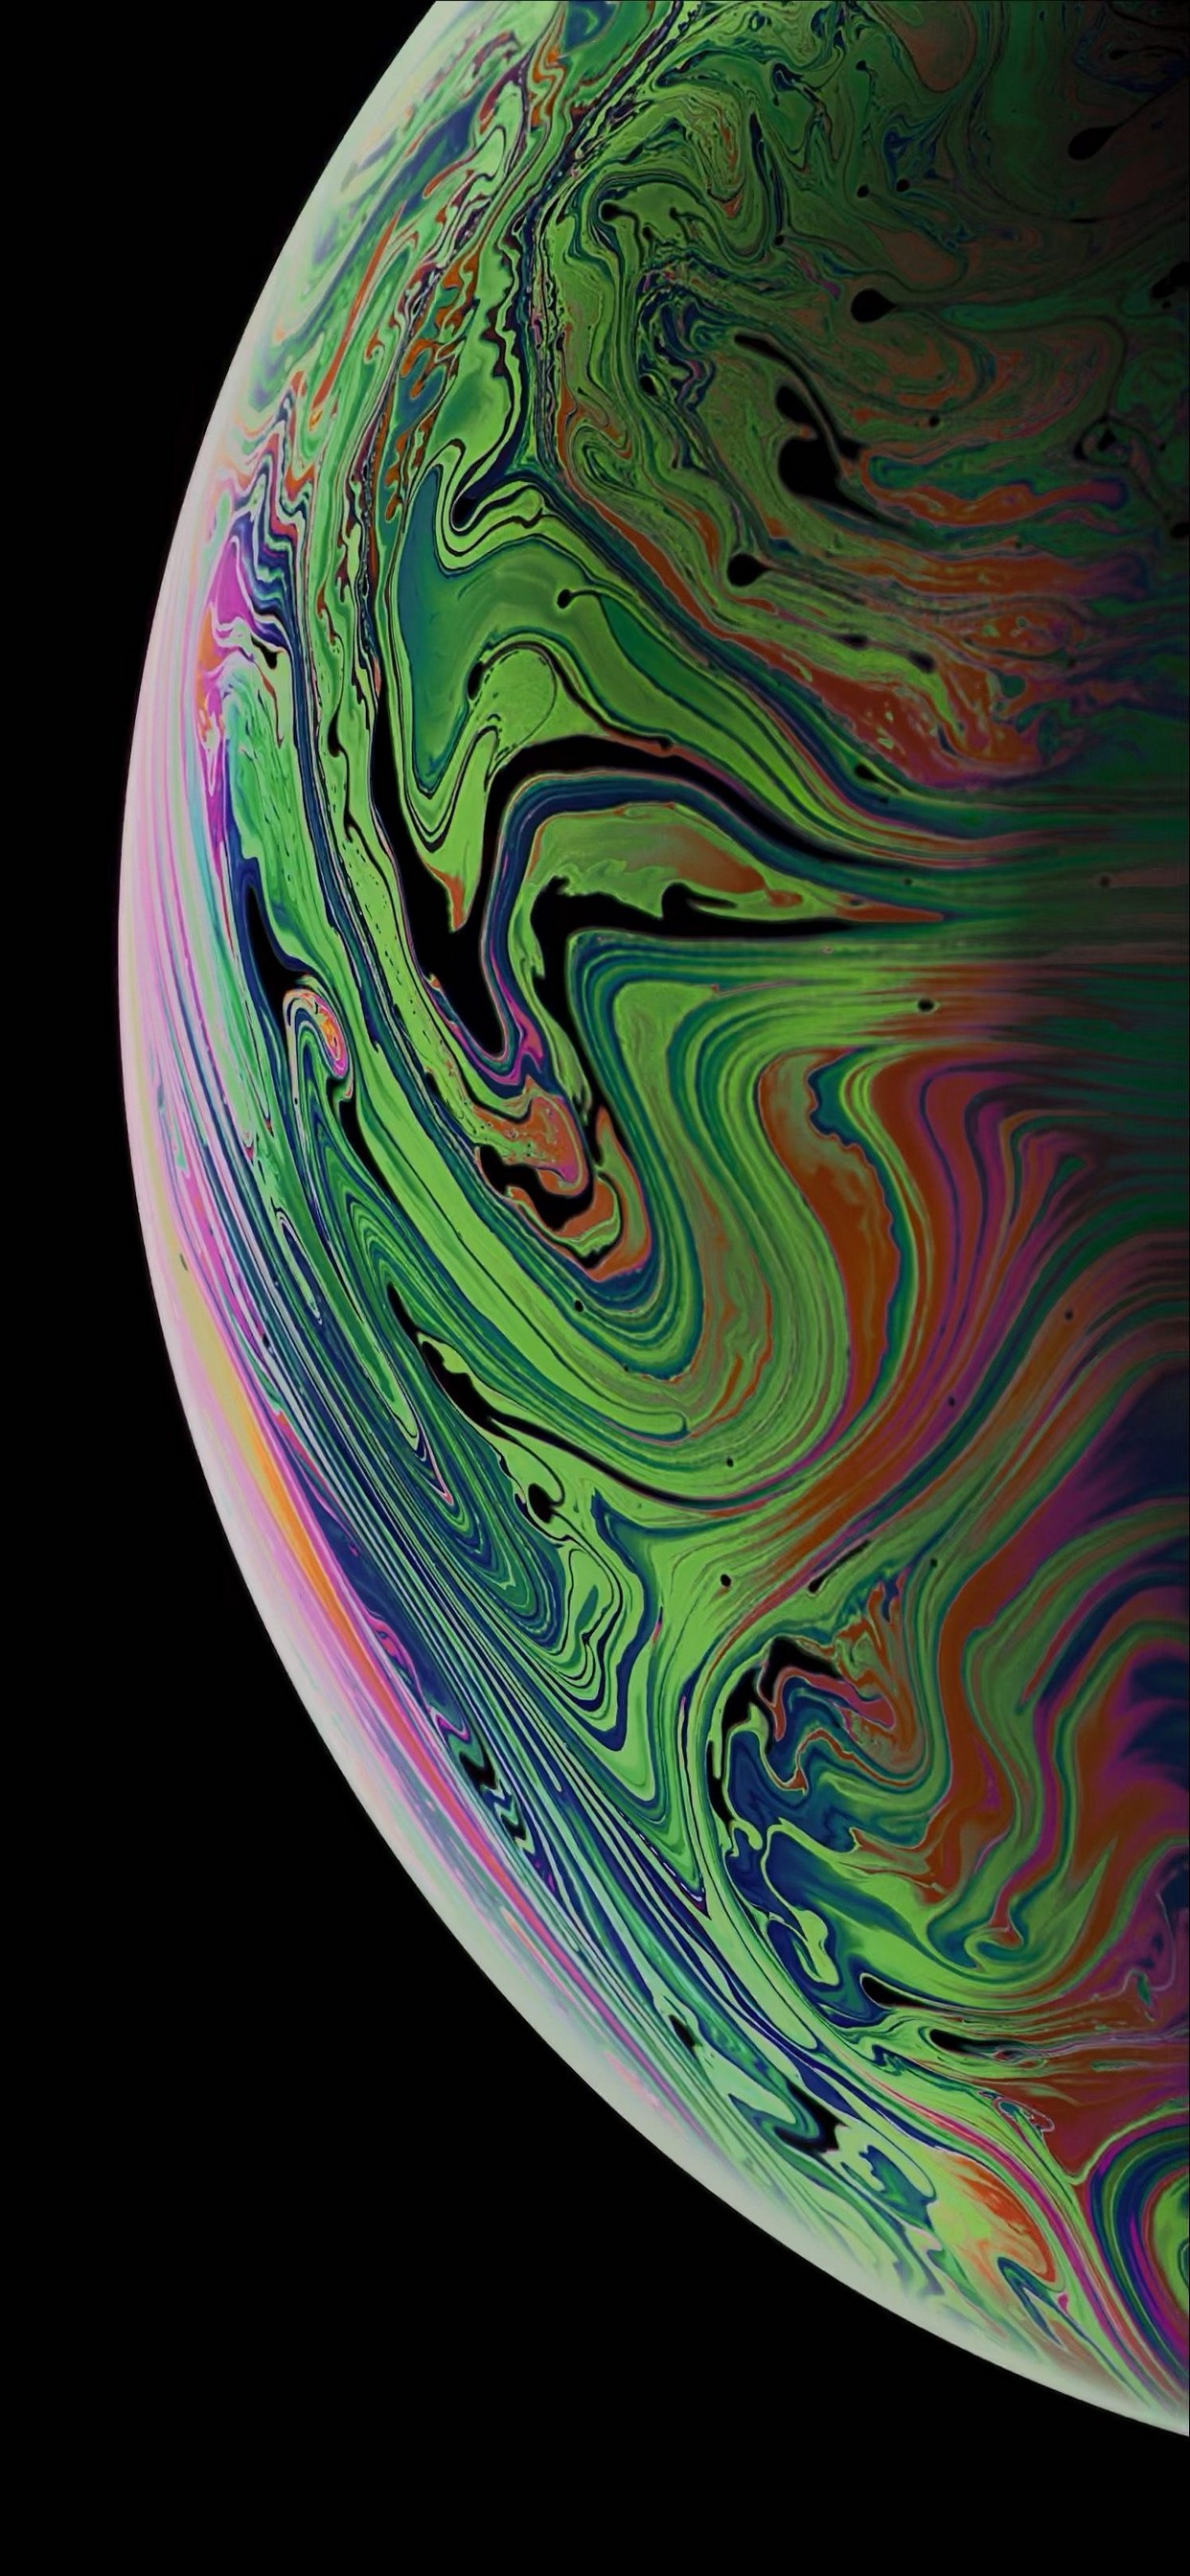 iPhone XS Max Lock Screen Wallpaper With high-resolution 1242X2688 pixel. You can set as wallpaper for Apple iPhone X, XS Max, XR, 8, 7, 6, SE, iPad. Enjoy and share your favorite HD wallpapers and background images